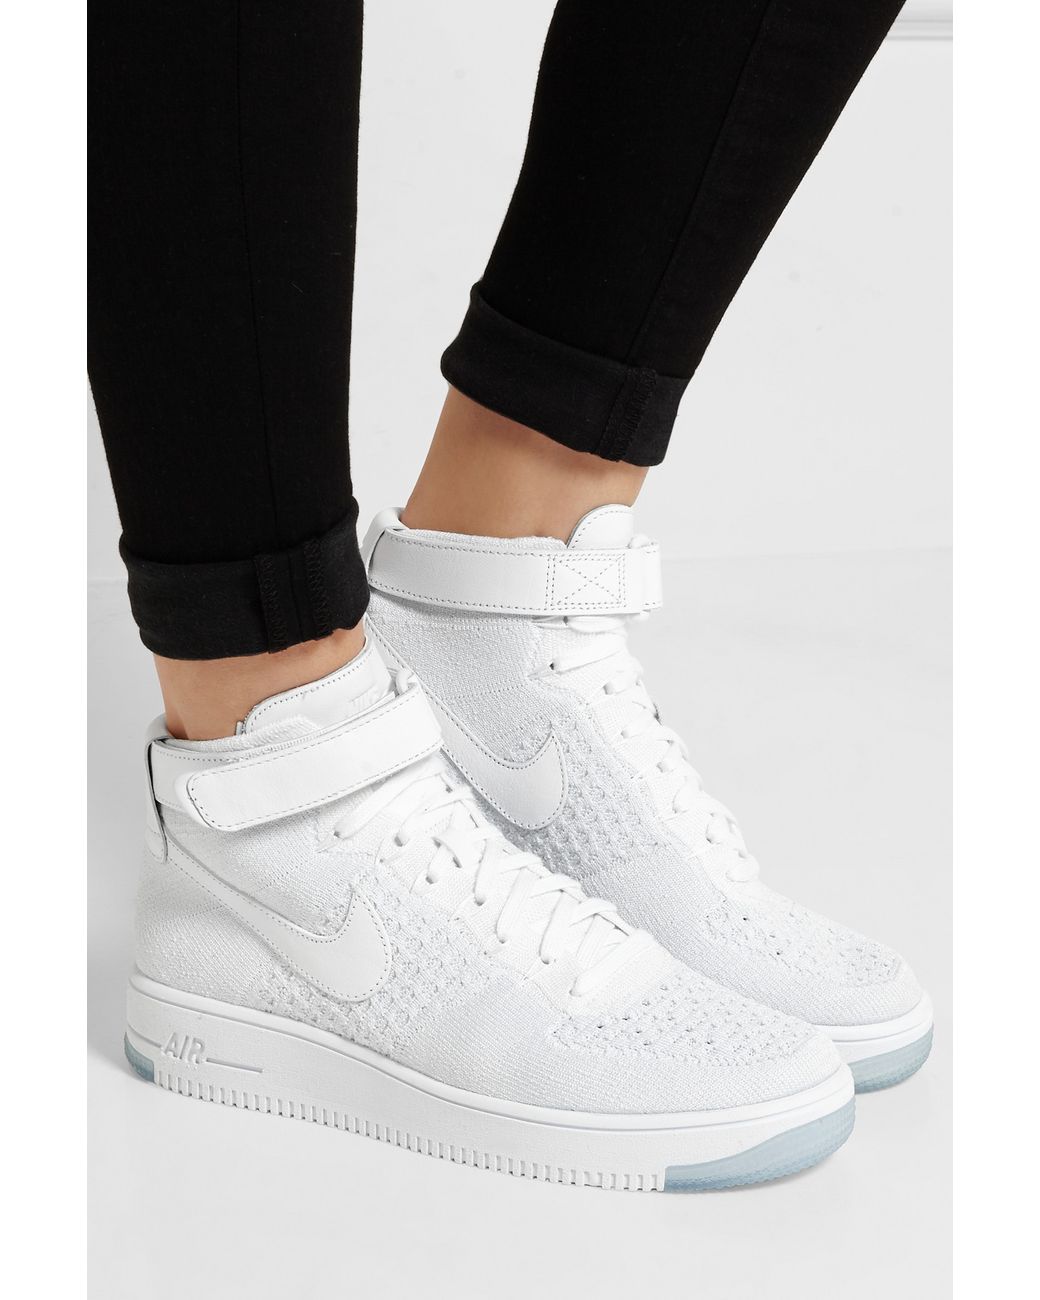 Nike Air Force 1 Flyknit Mesh And Textured-leather Sneakers in White | Lyst